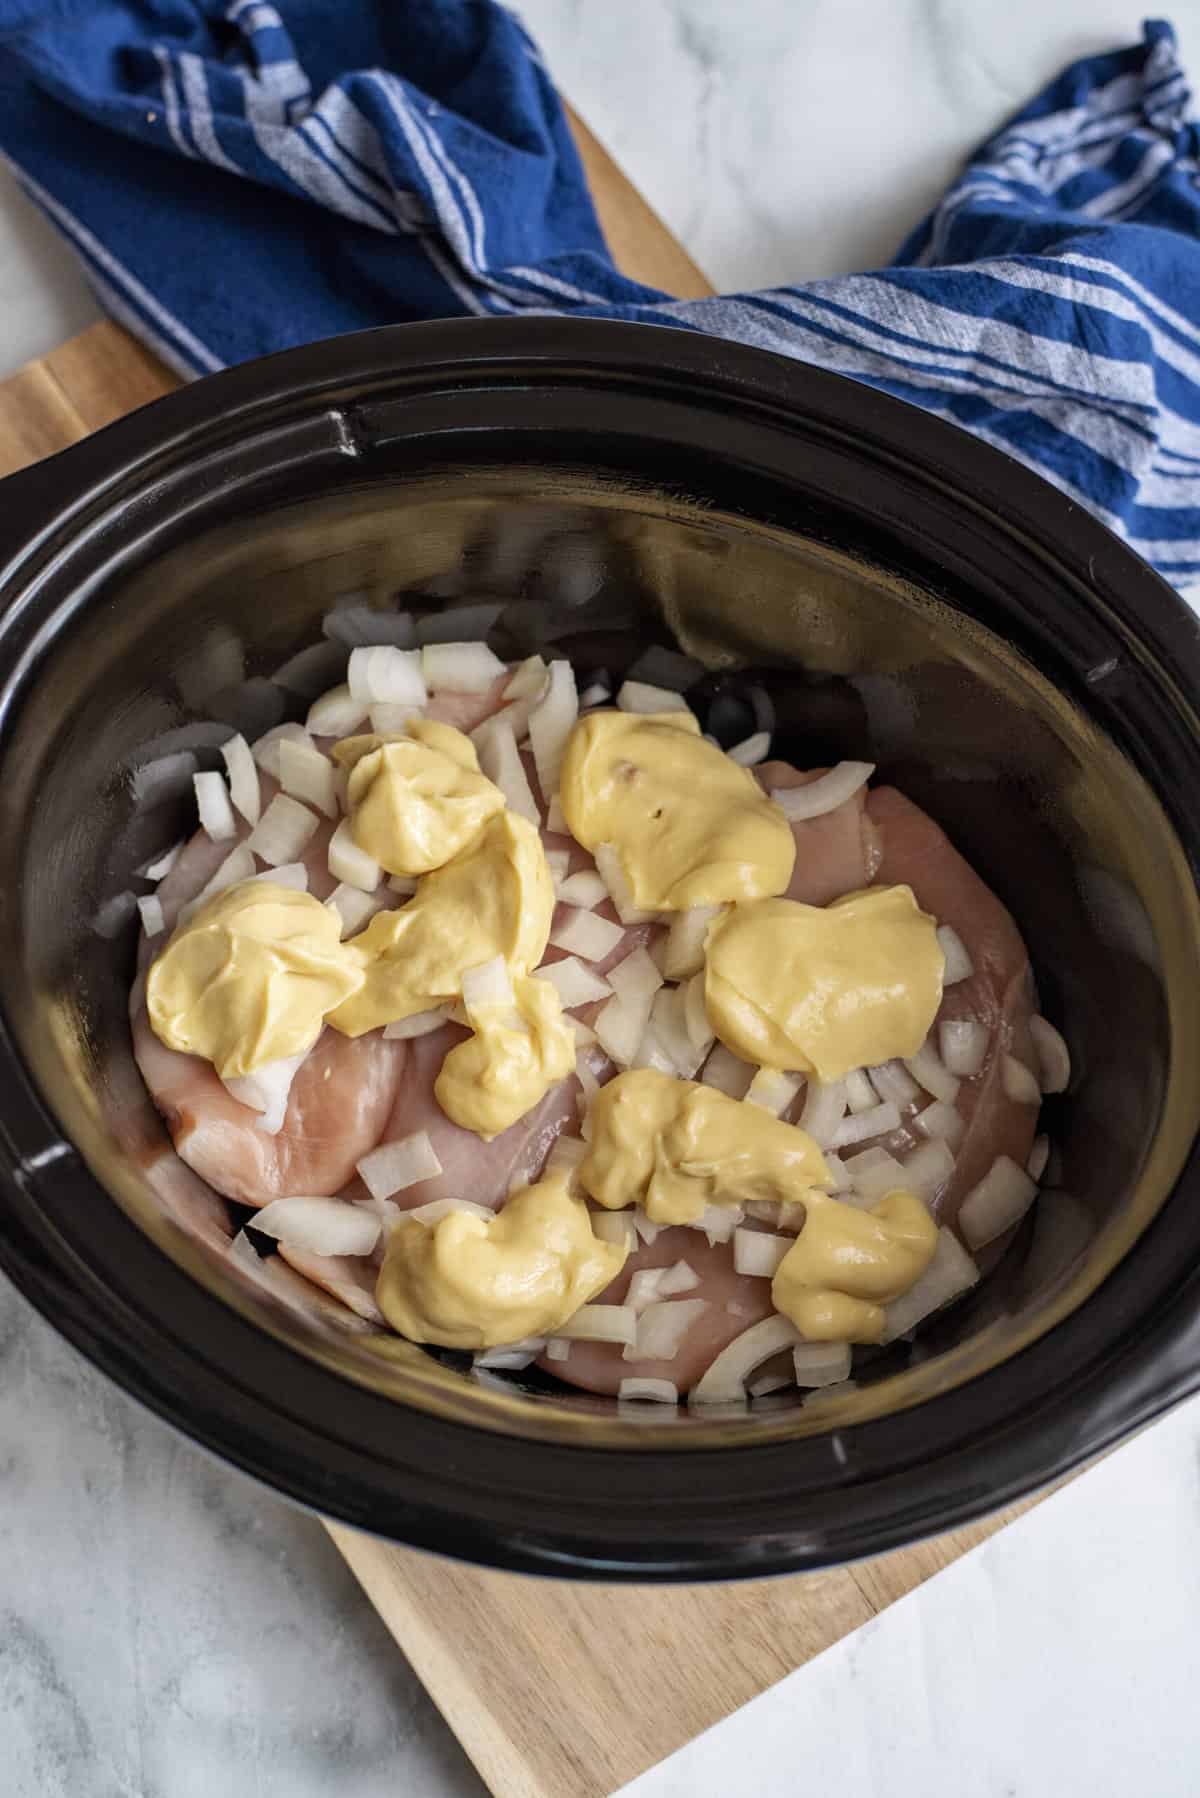 Add cream of chicken soup to slow cooker.